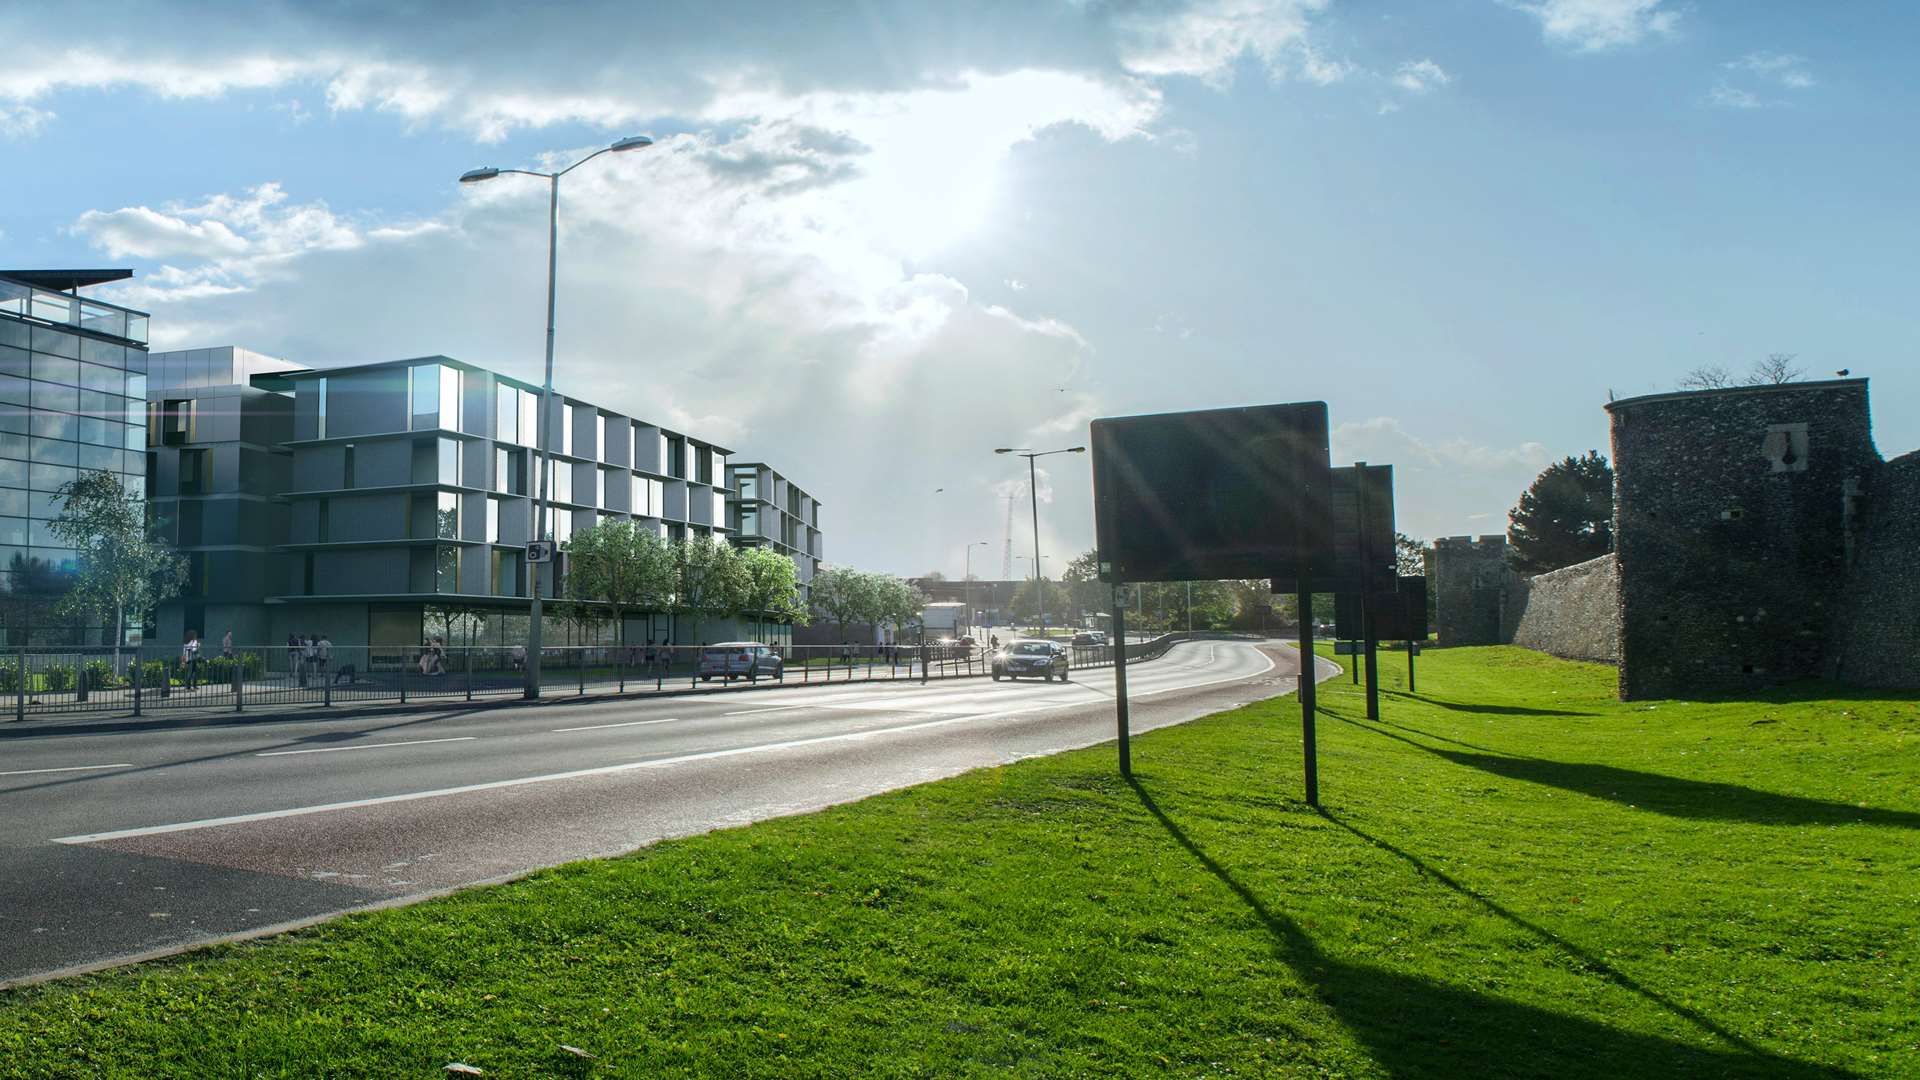 Guy Holloway's plans for student accommodation at the former Peugeot site